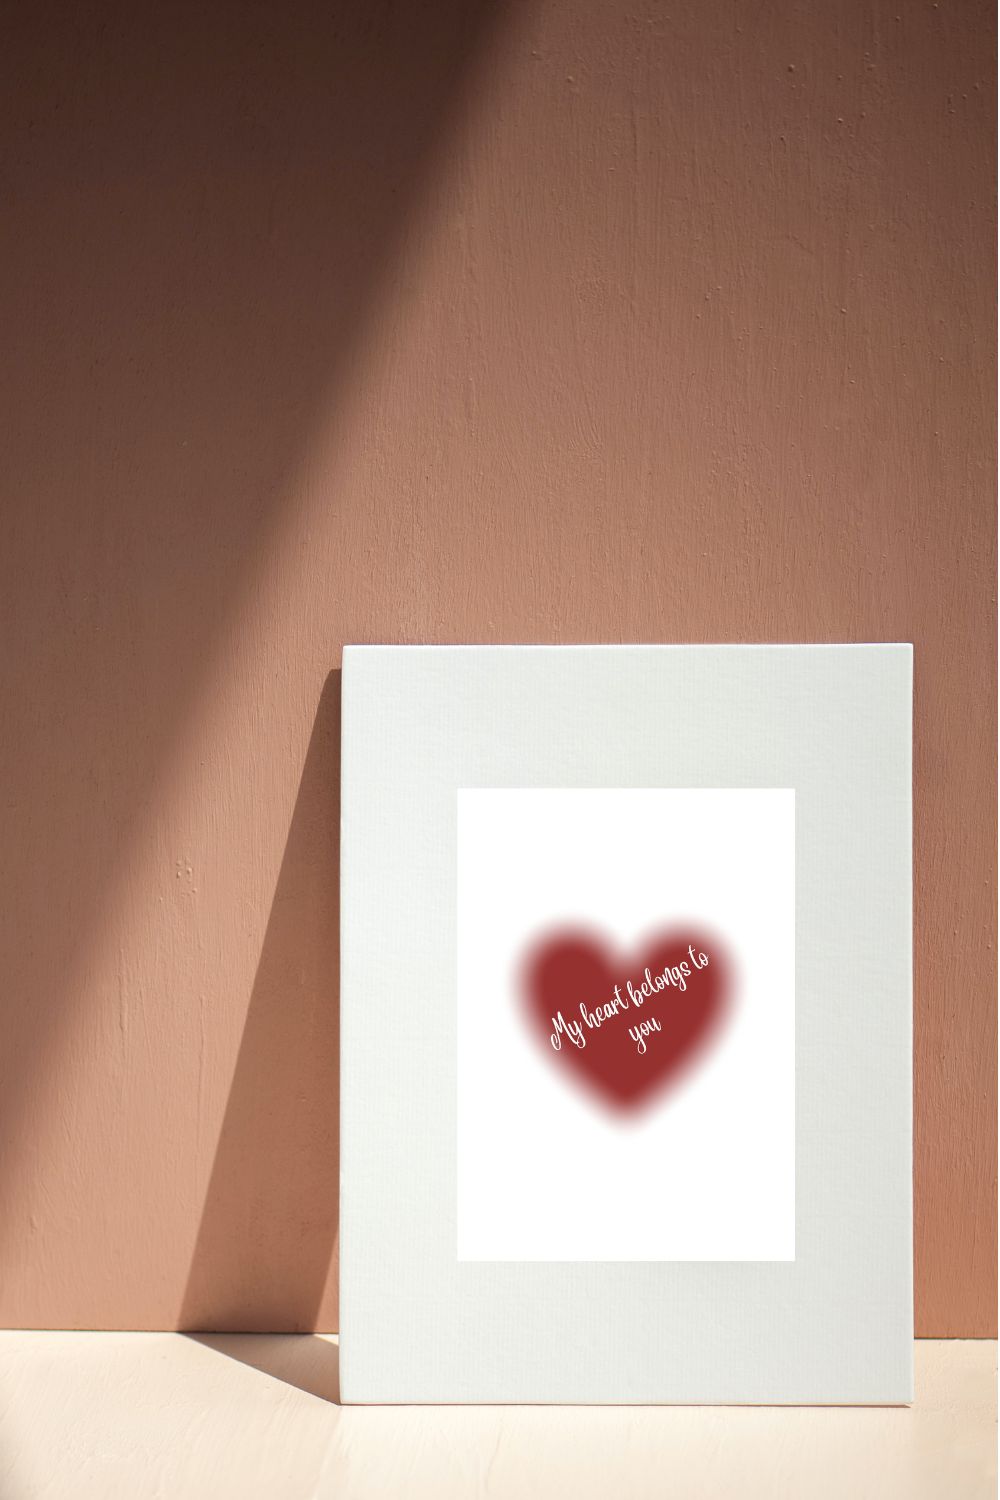 My heart belongs to you Printable, L O V E, Classic Love , Bedroom,Living Room,Home Decor, Digital DOWNLOAD Printable pinterest preview image.